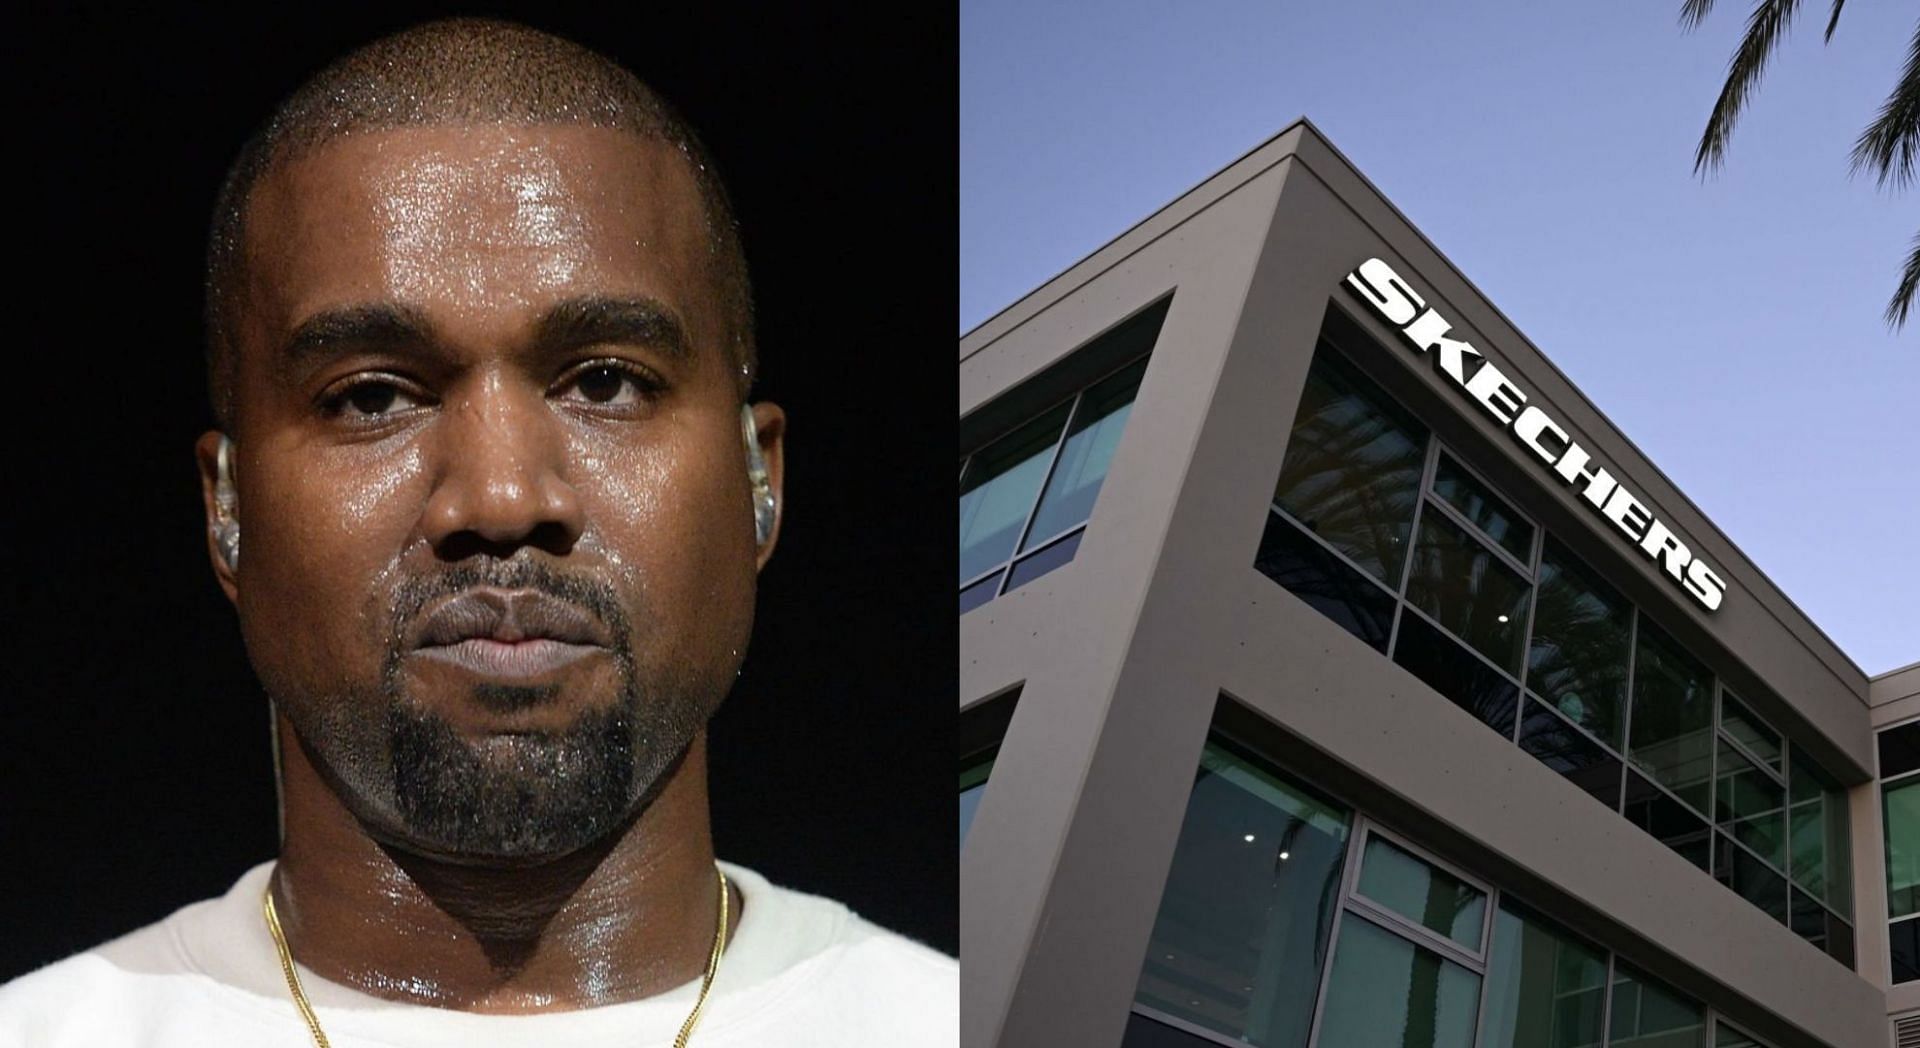 hebzuchtig kaas Diakritisch Who owns Skechers? Hilarious Kanye memes take over Twitter as rapper is  escorted out of brand's headquarters